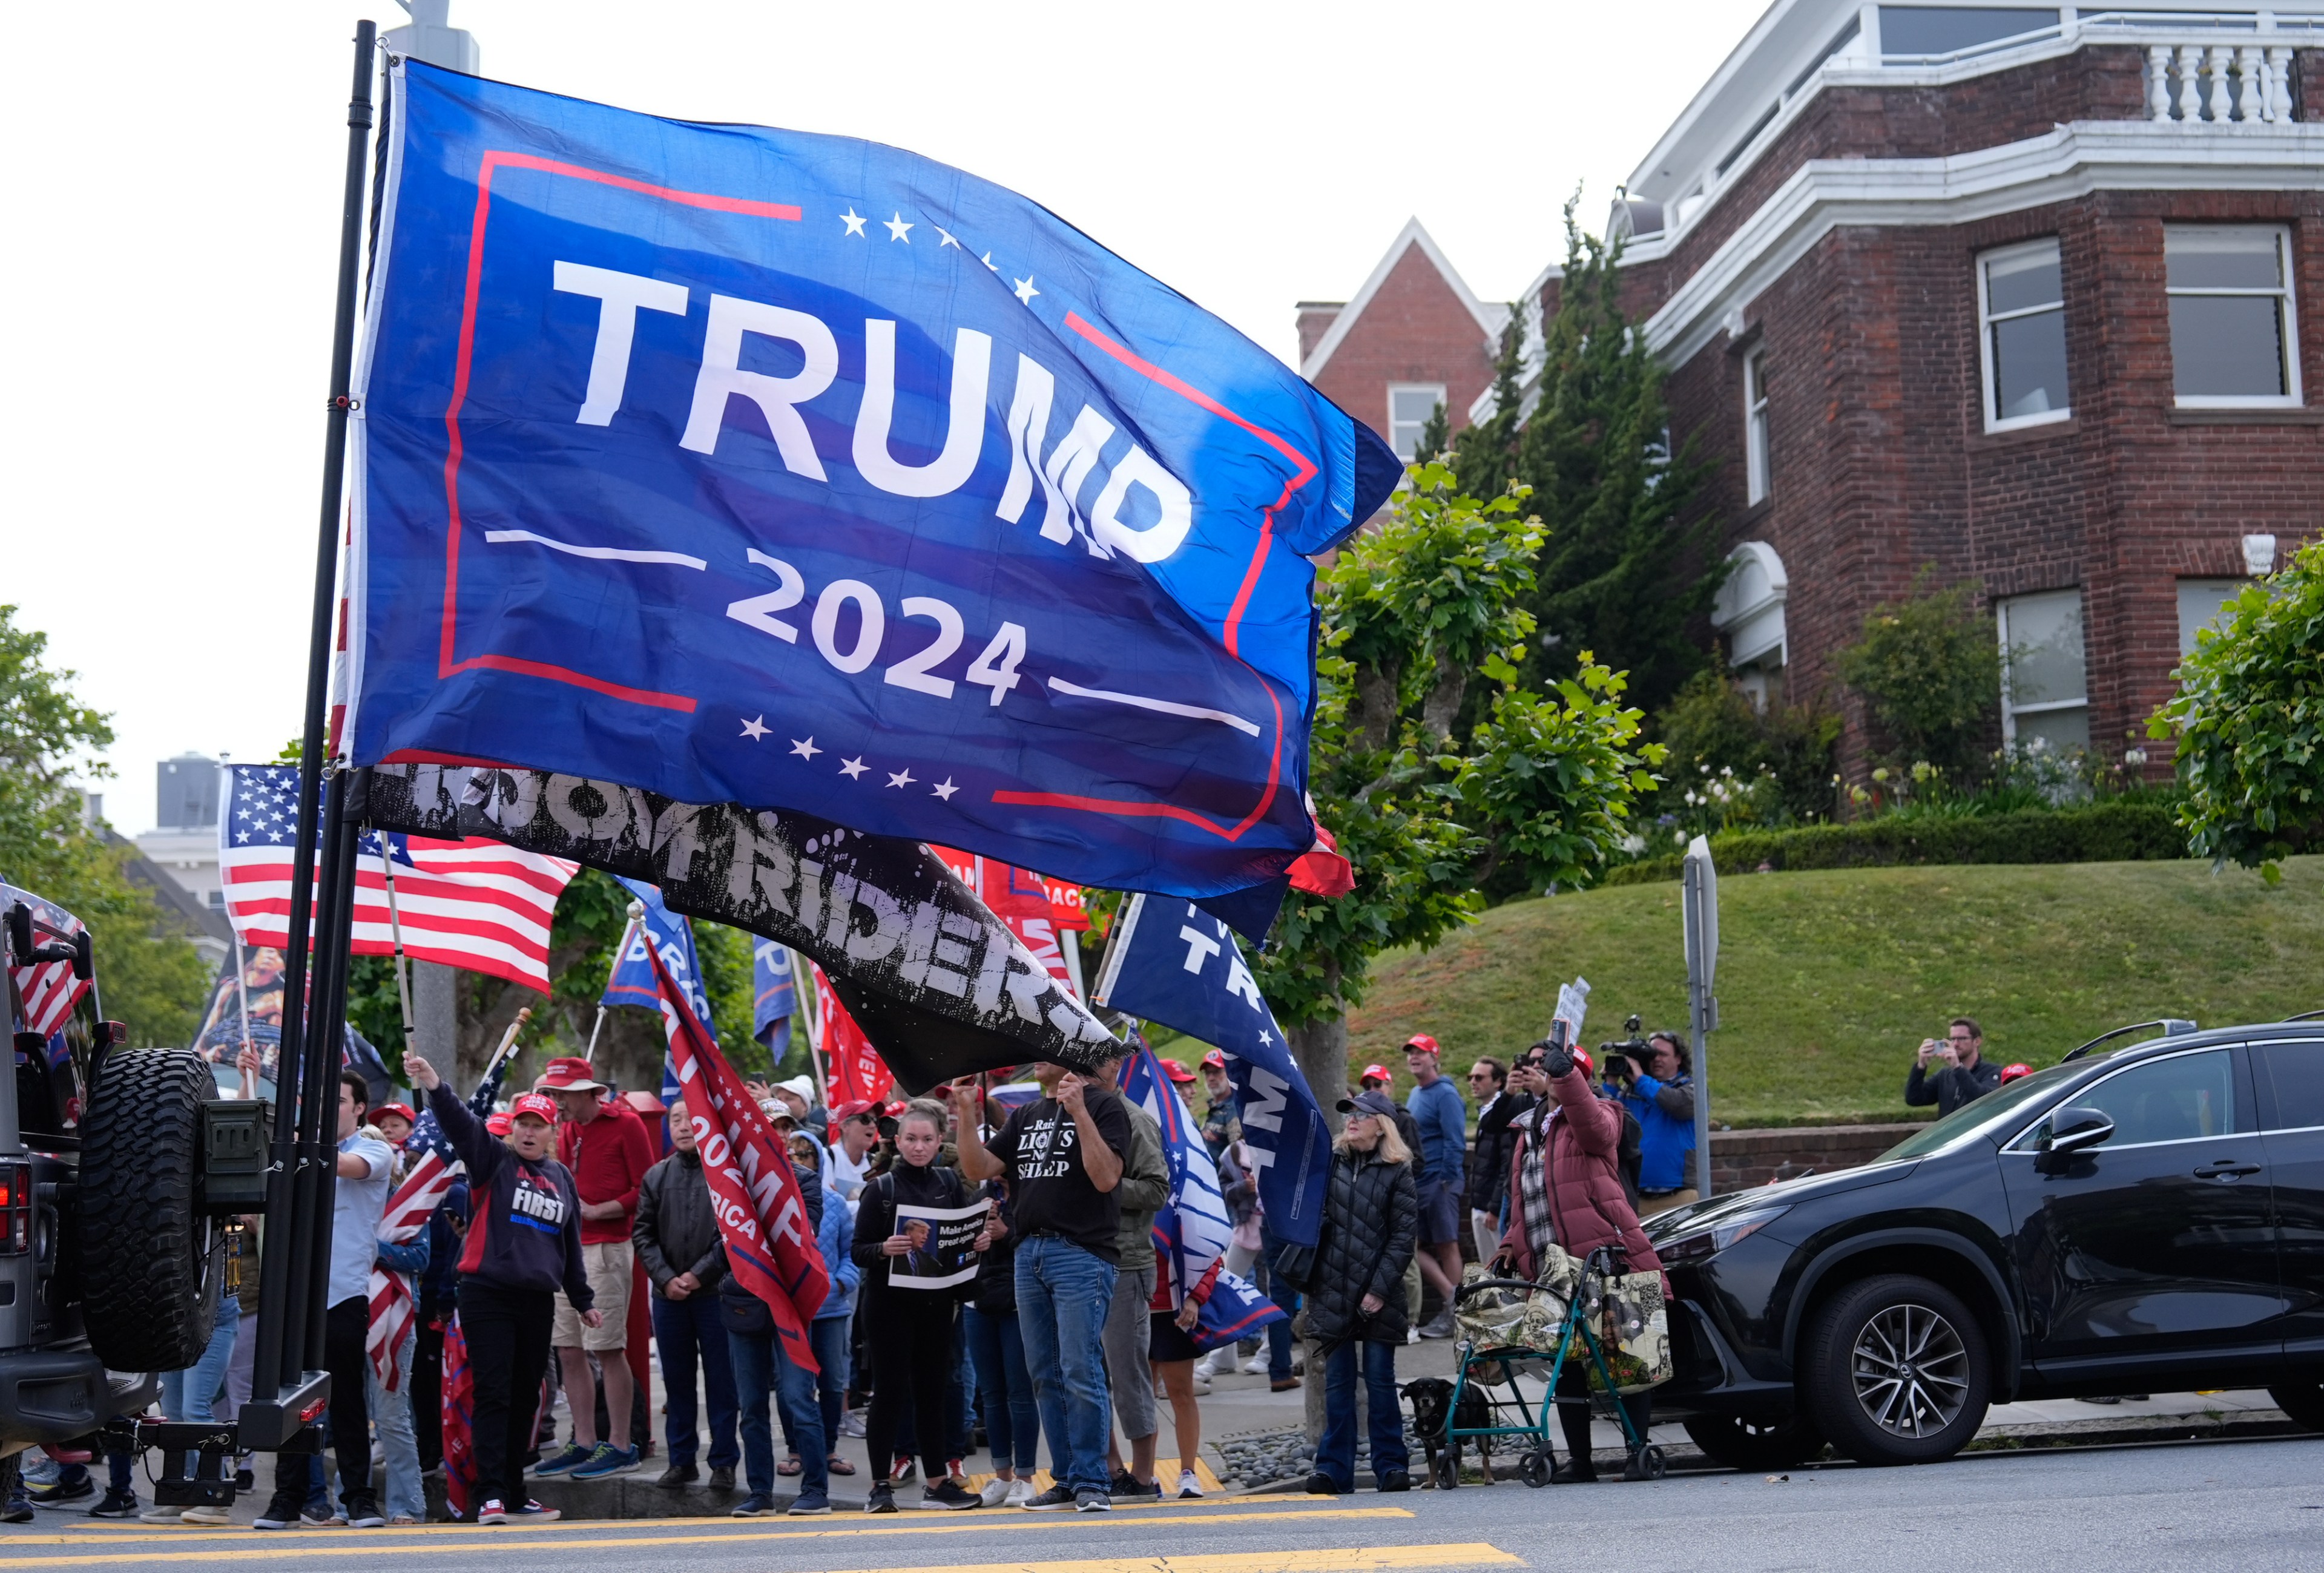 A group of people is gathered on a street, holding flags and signs supporting Trump for the 2024 presidential campaign. A large banner reads &quot;TRUMP 2024.&quot;